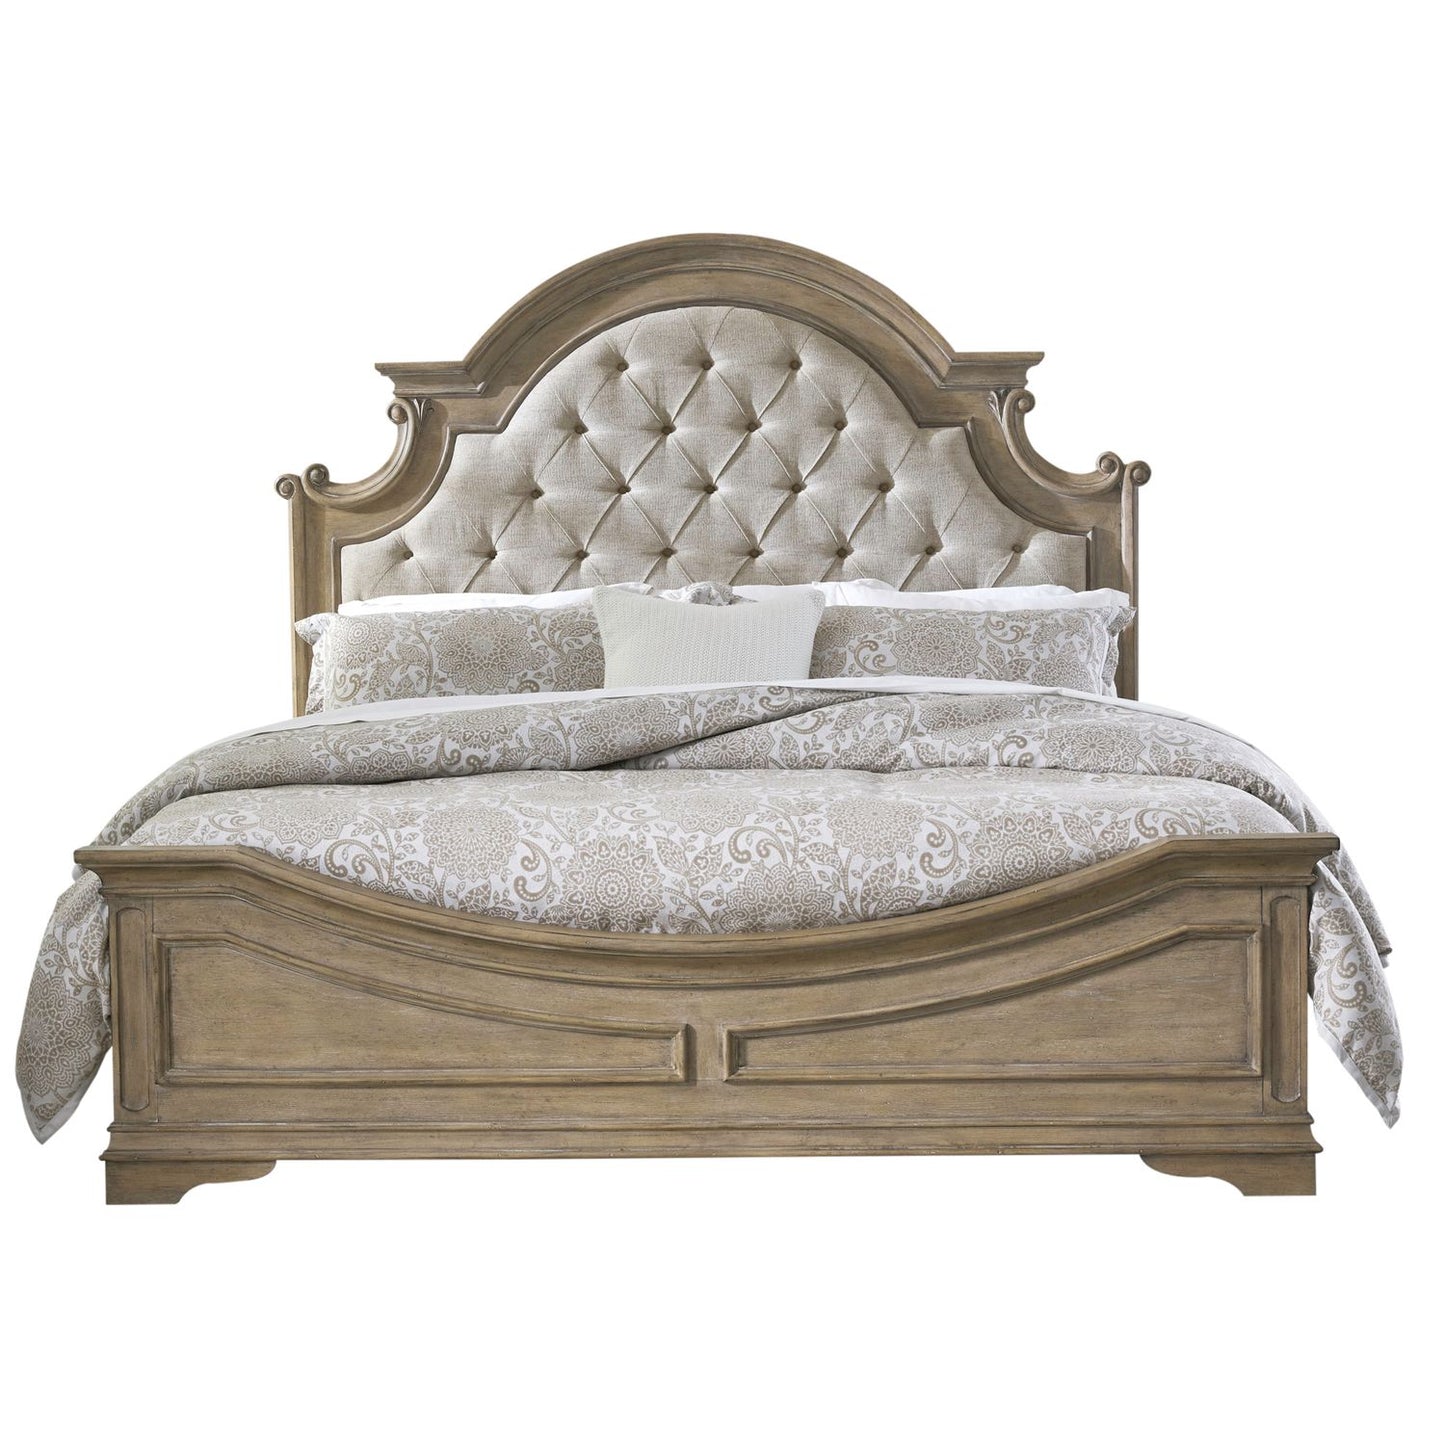 Magnolia Manor - King Uph Bed